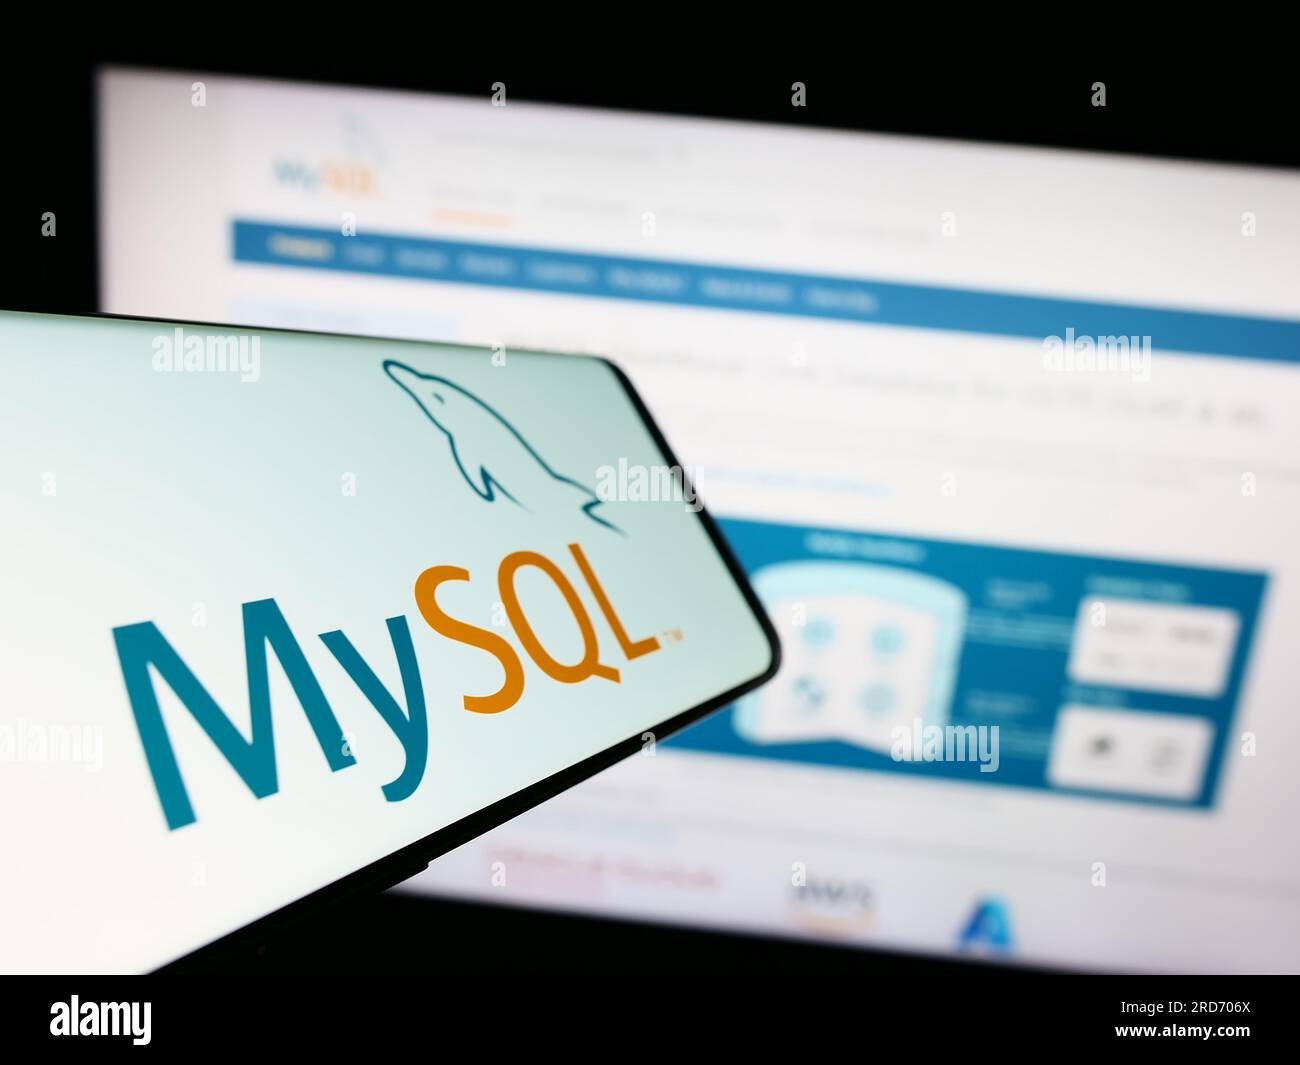 Smartphone with logo of relational database management system MySQL on screen in front of website. Focus on center of phone display. Stock Photo